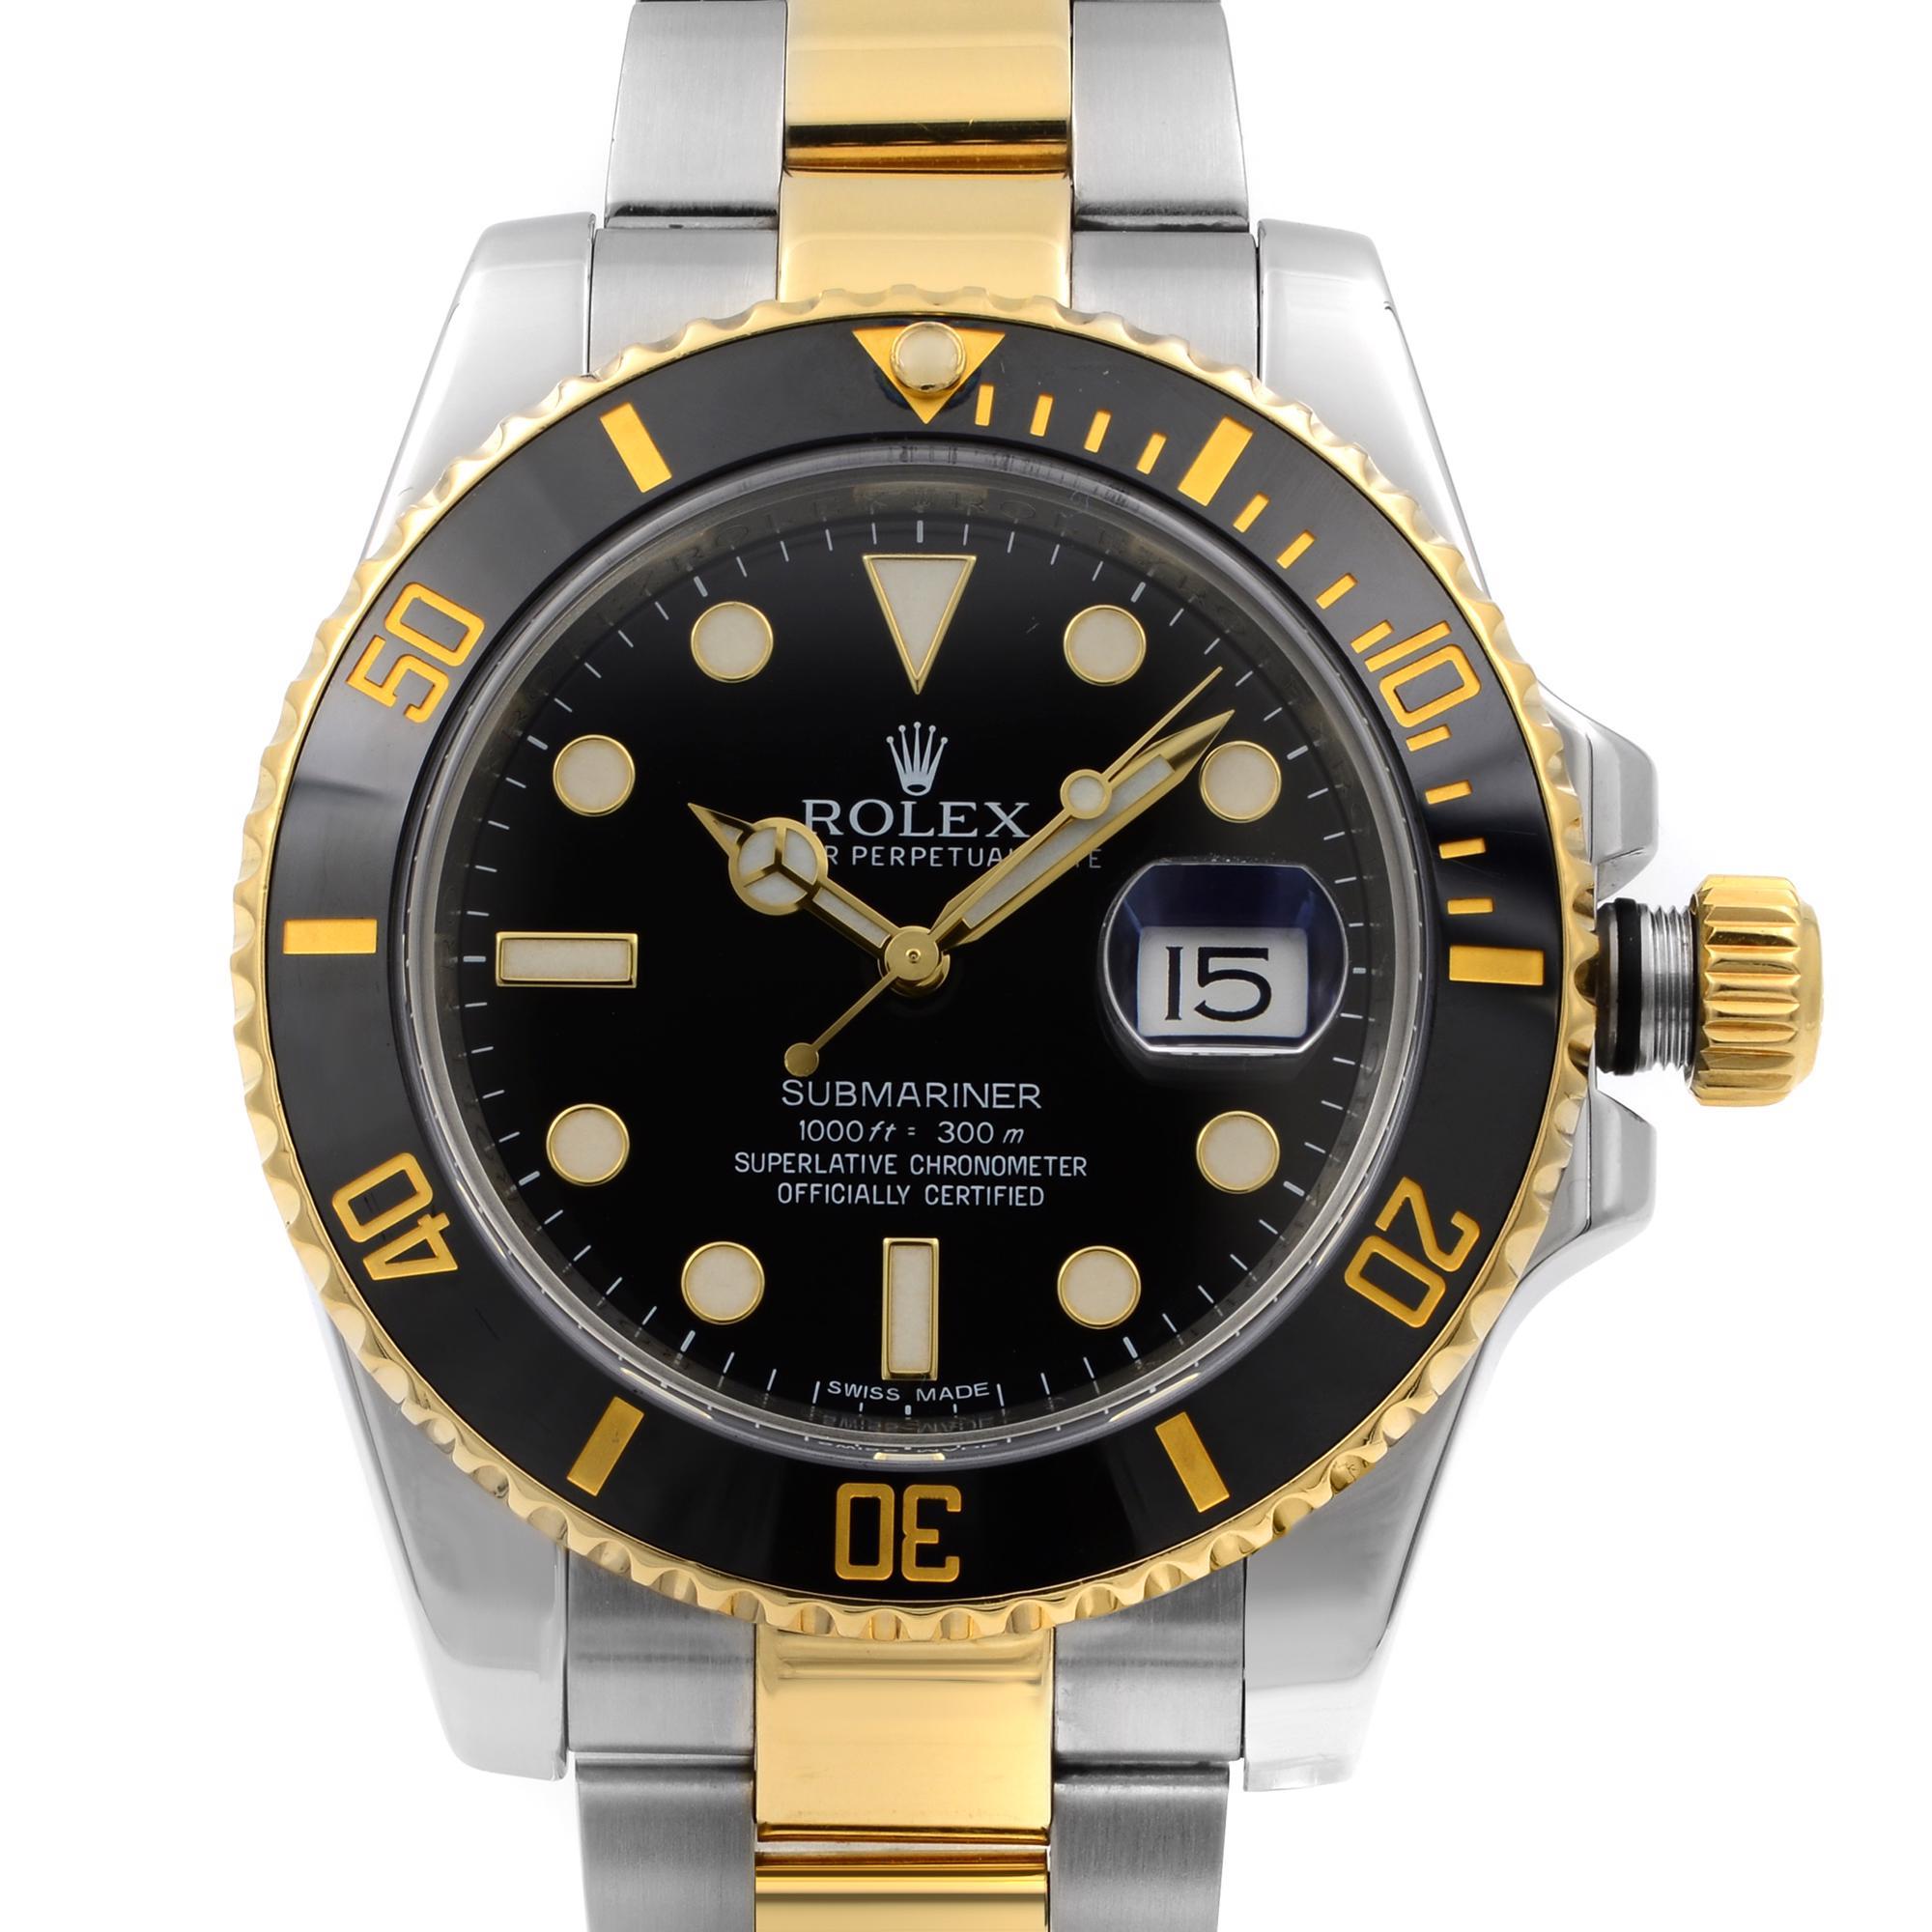 Pre-owned Rolex Submariner 116613. No Original Box and Papers are Included. Comes With Chronostore Box and Chronostore Authenticity Card. Covered by 1-year Chronostore Warranty. 
Details:
Brand Rolex
Type Wristwatch
Department Men
Model Number